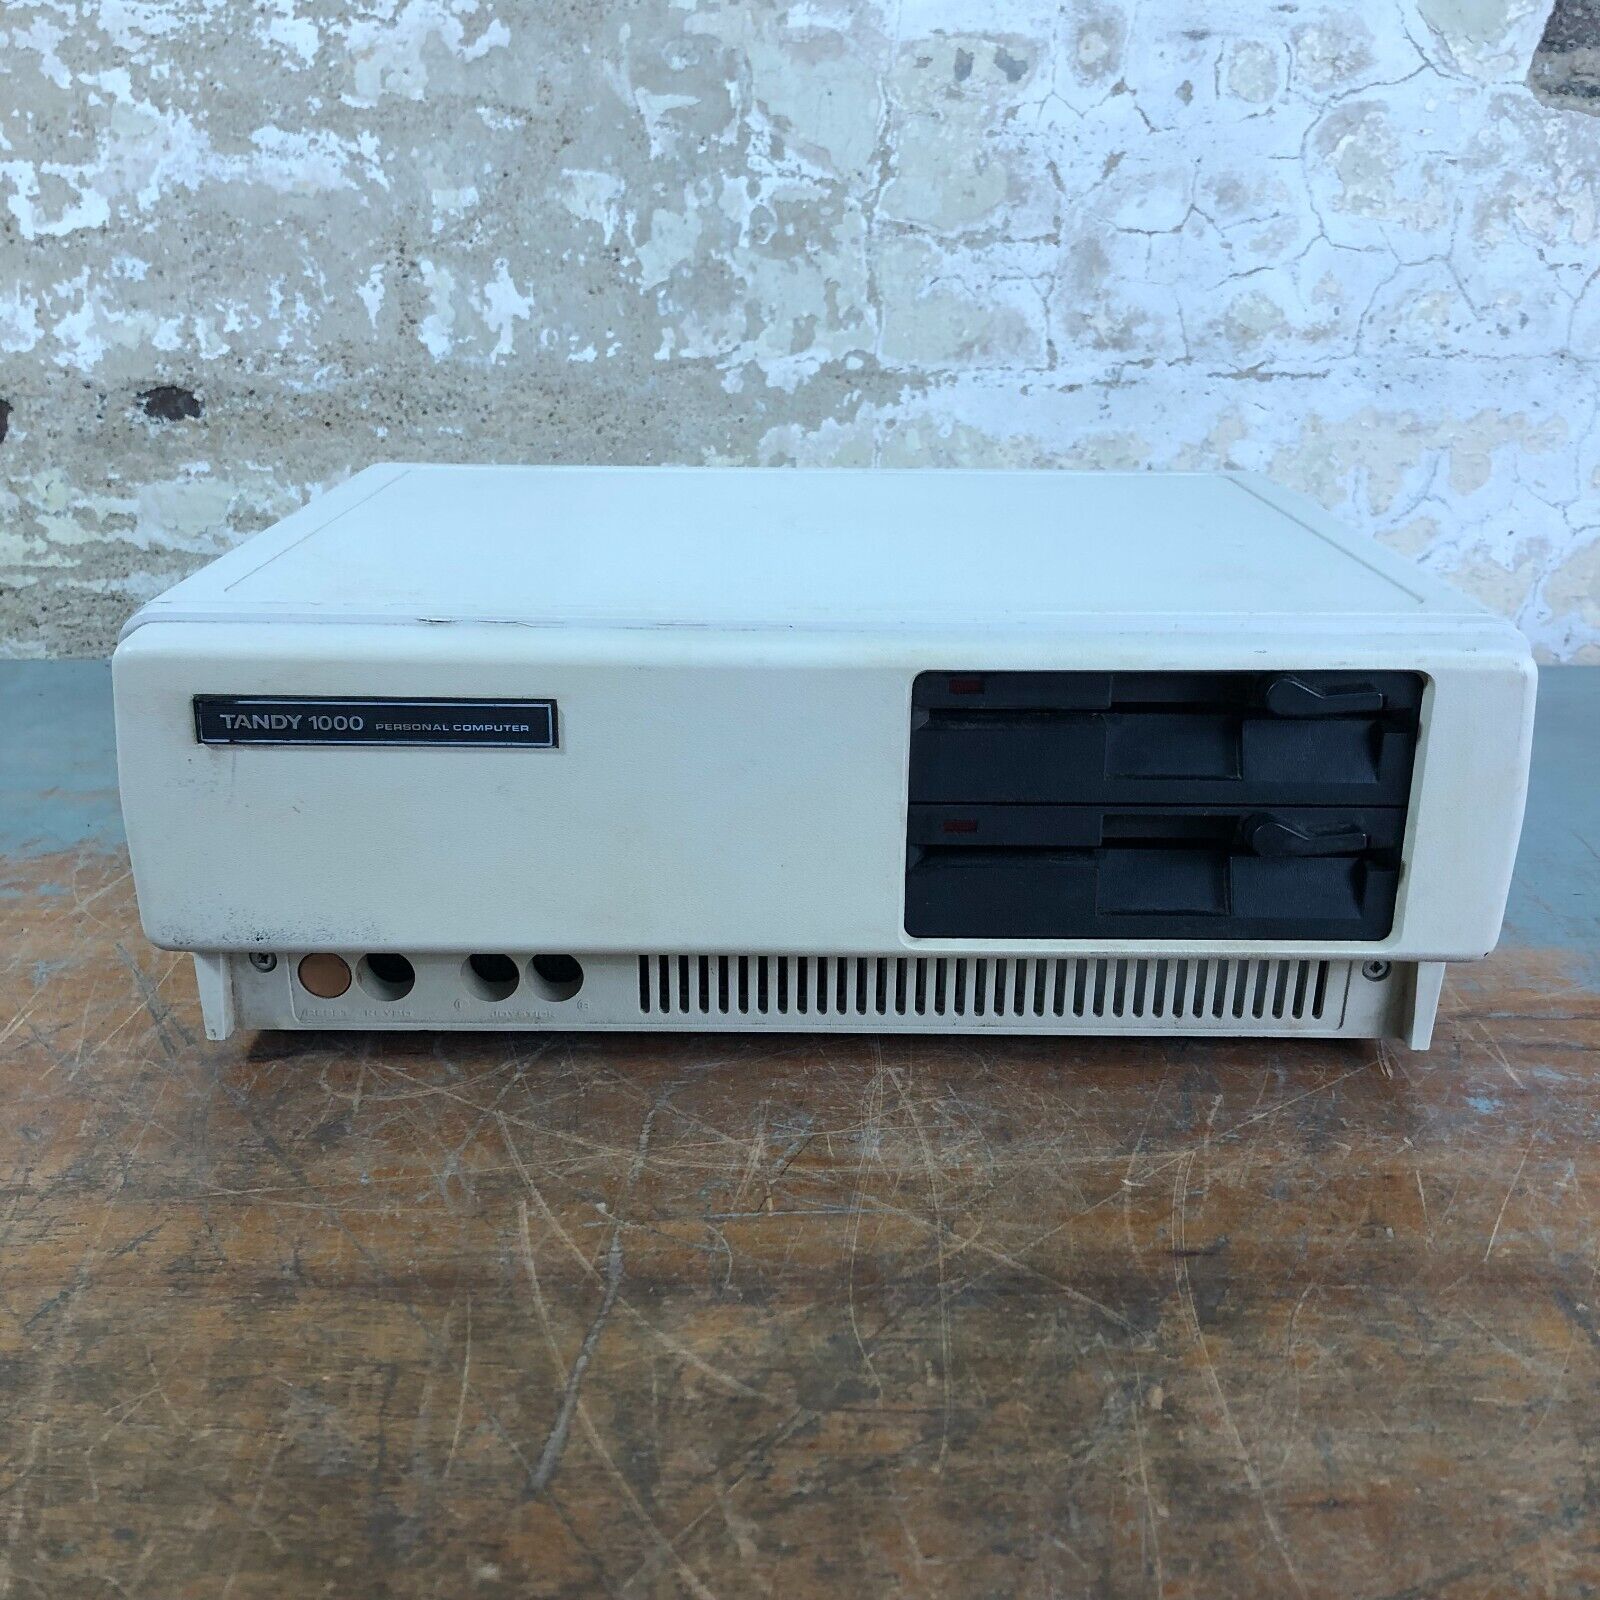 Vintage Tandy 1000 25-1600 Personal Computer - Ready for Restore